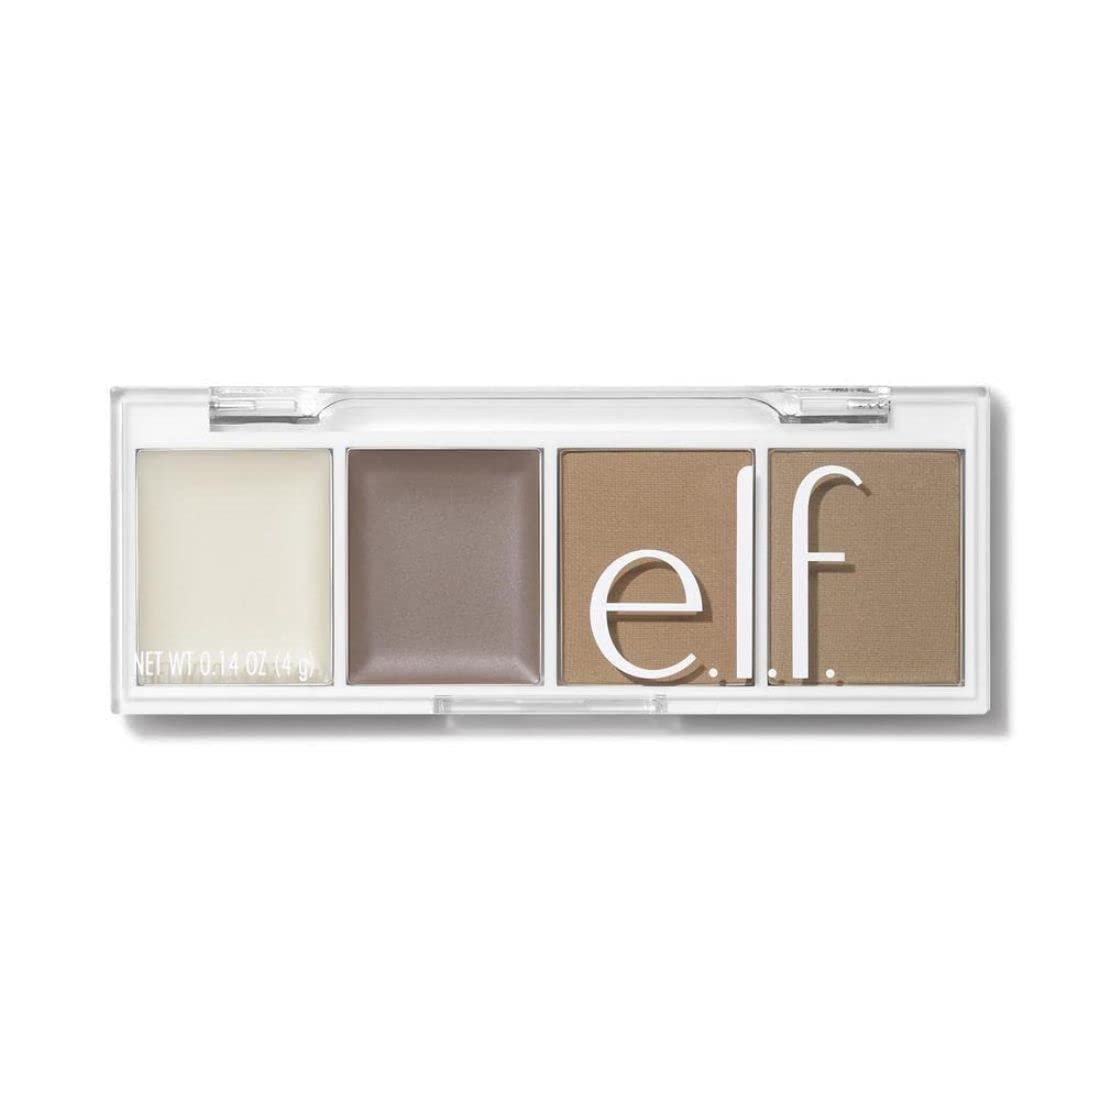 e.l.f. Bite-Size Brow, Mini Brow Quad with Ultra-Pigmented Waxes & Powders, Eyebrow Grooming & Makeup Kit, Blonde, 0.14